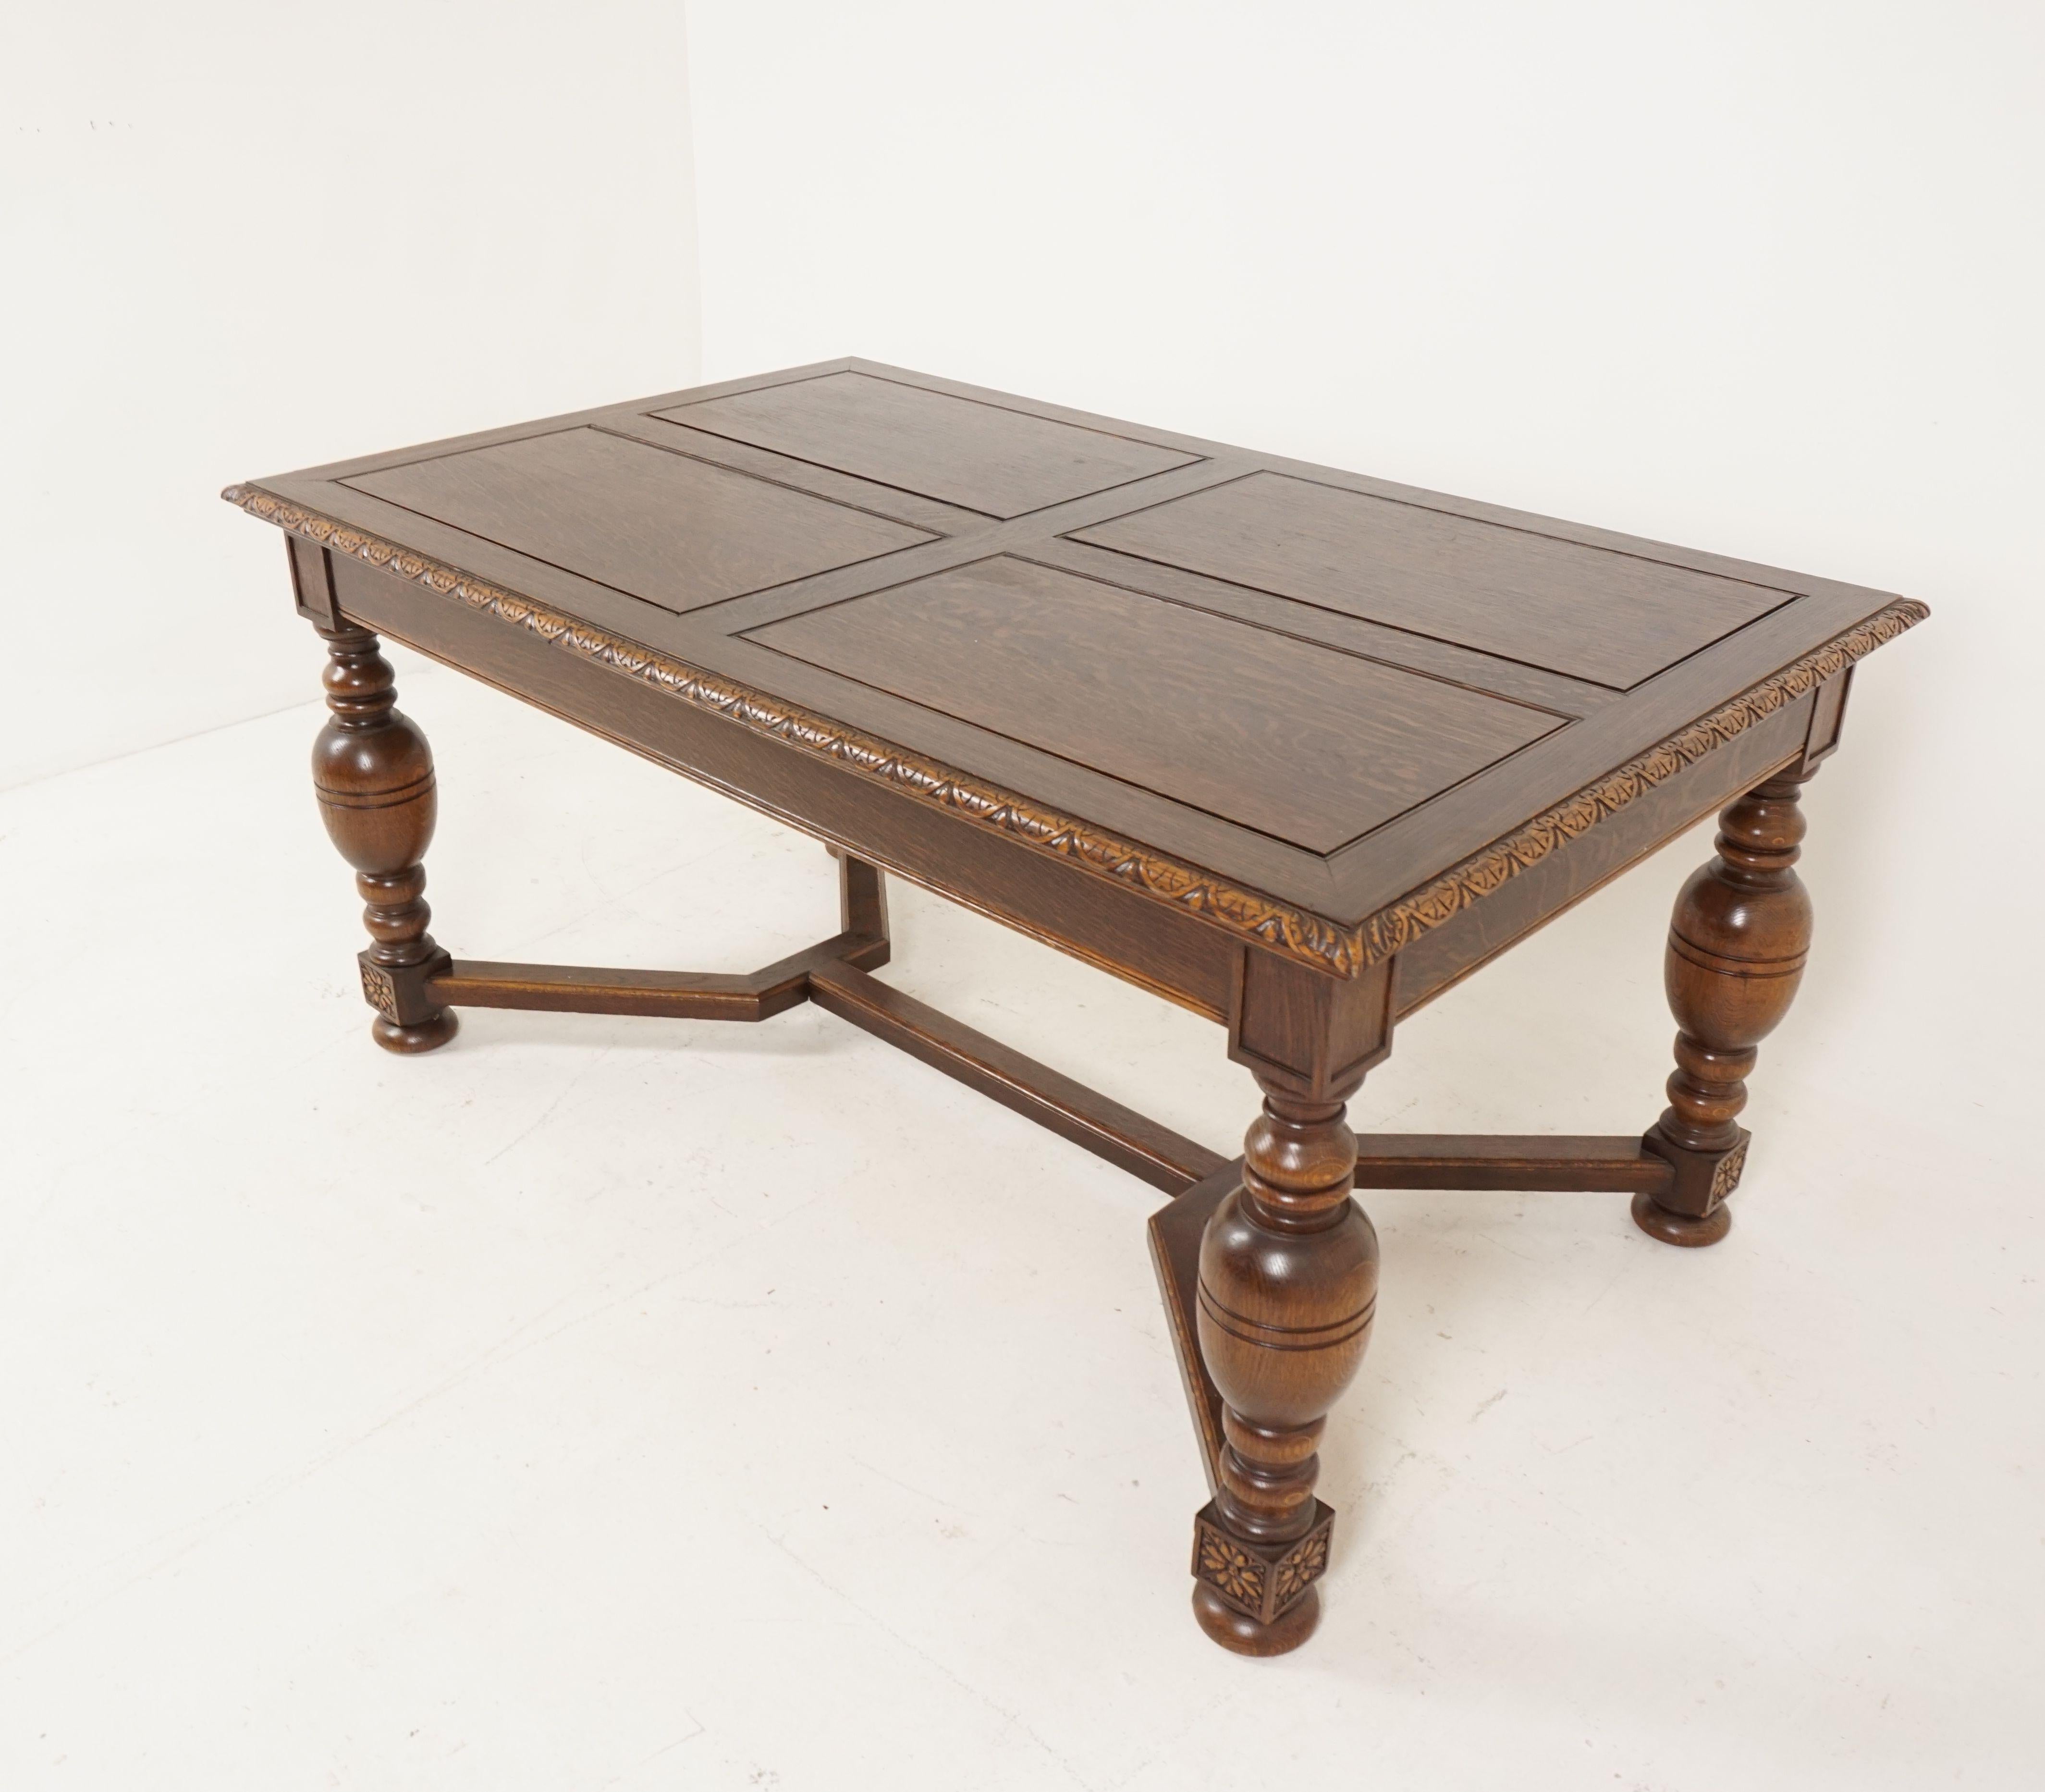 Antique refectory table, tiger oak, draw leaf table, dining table, Scotland 1930, B2498

Scotland 1930
Solid oak and veneers
Original finish
Four paneled tiger oak top with carved edge
Pair of draw leaves sit underneath the table
When they